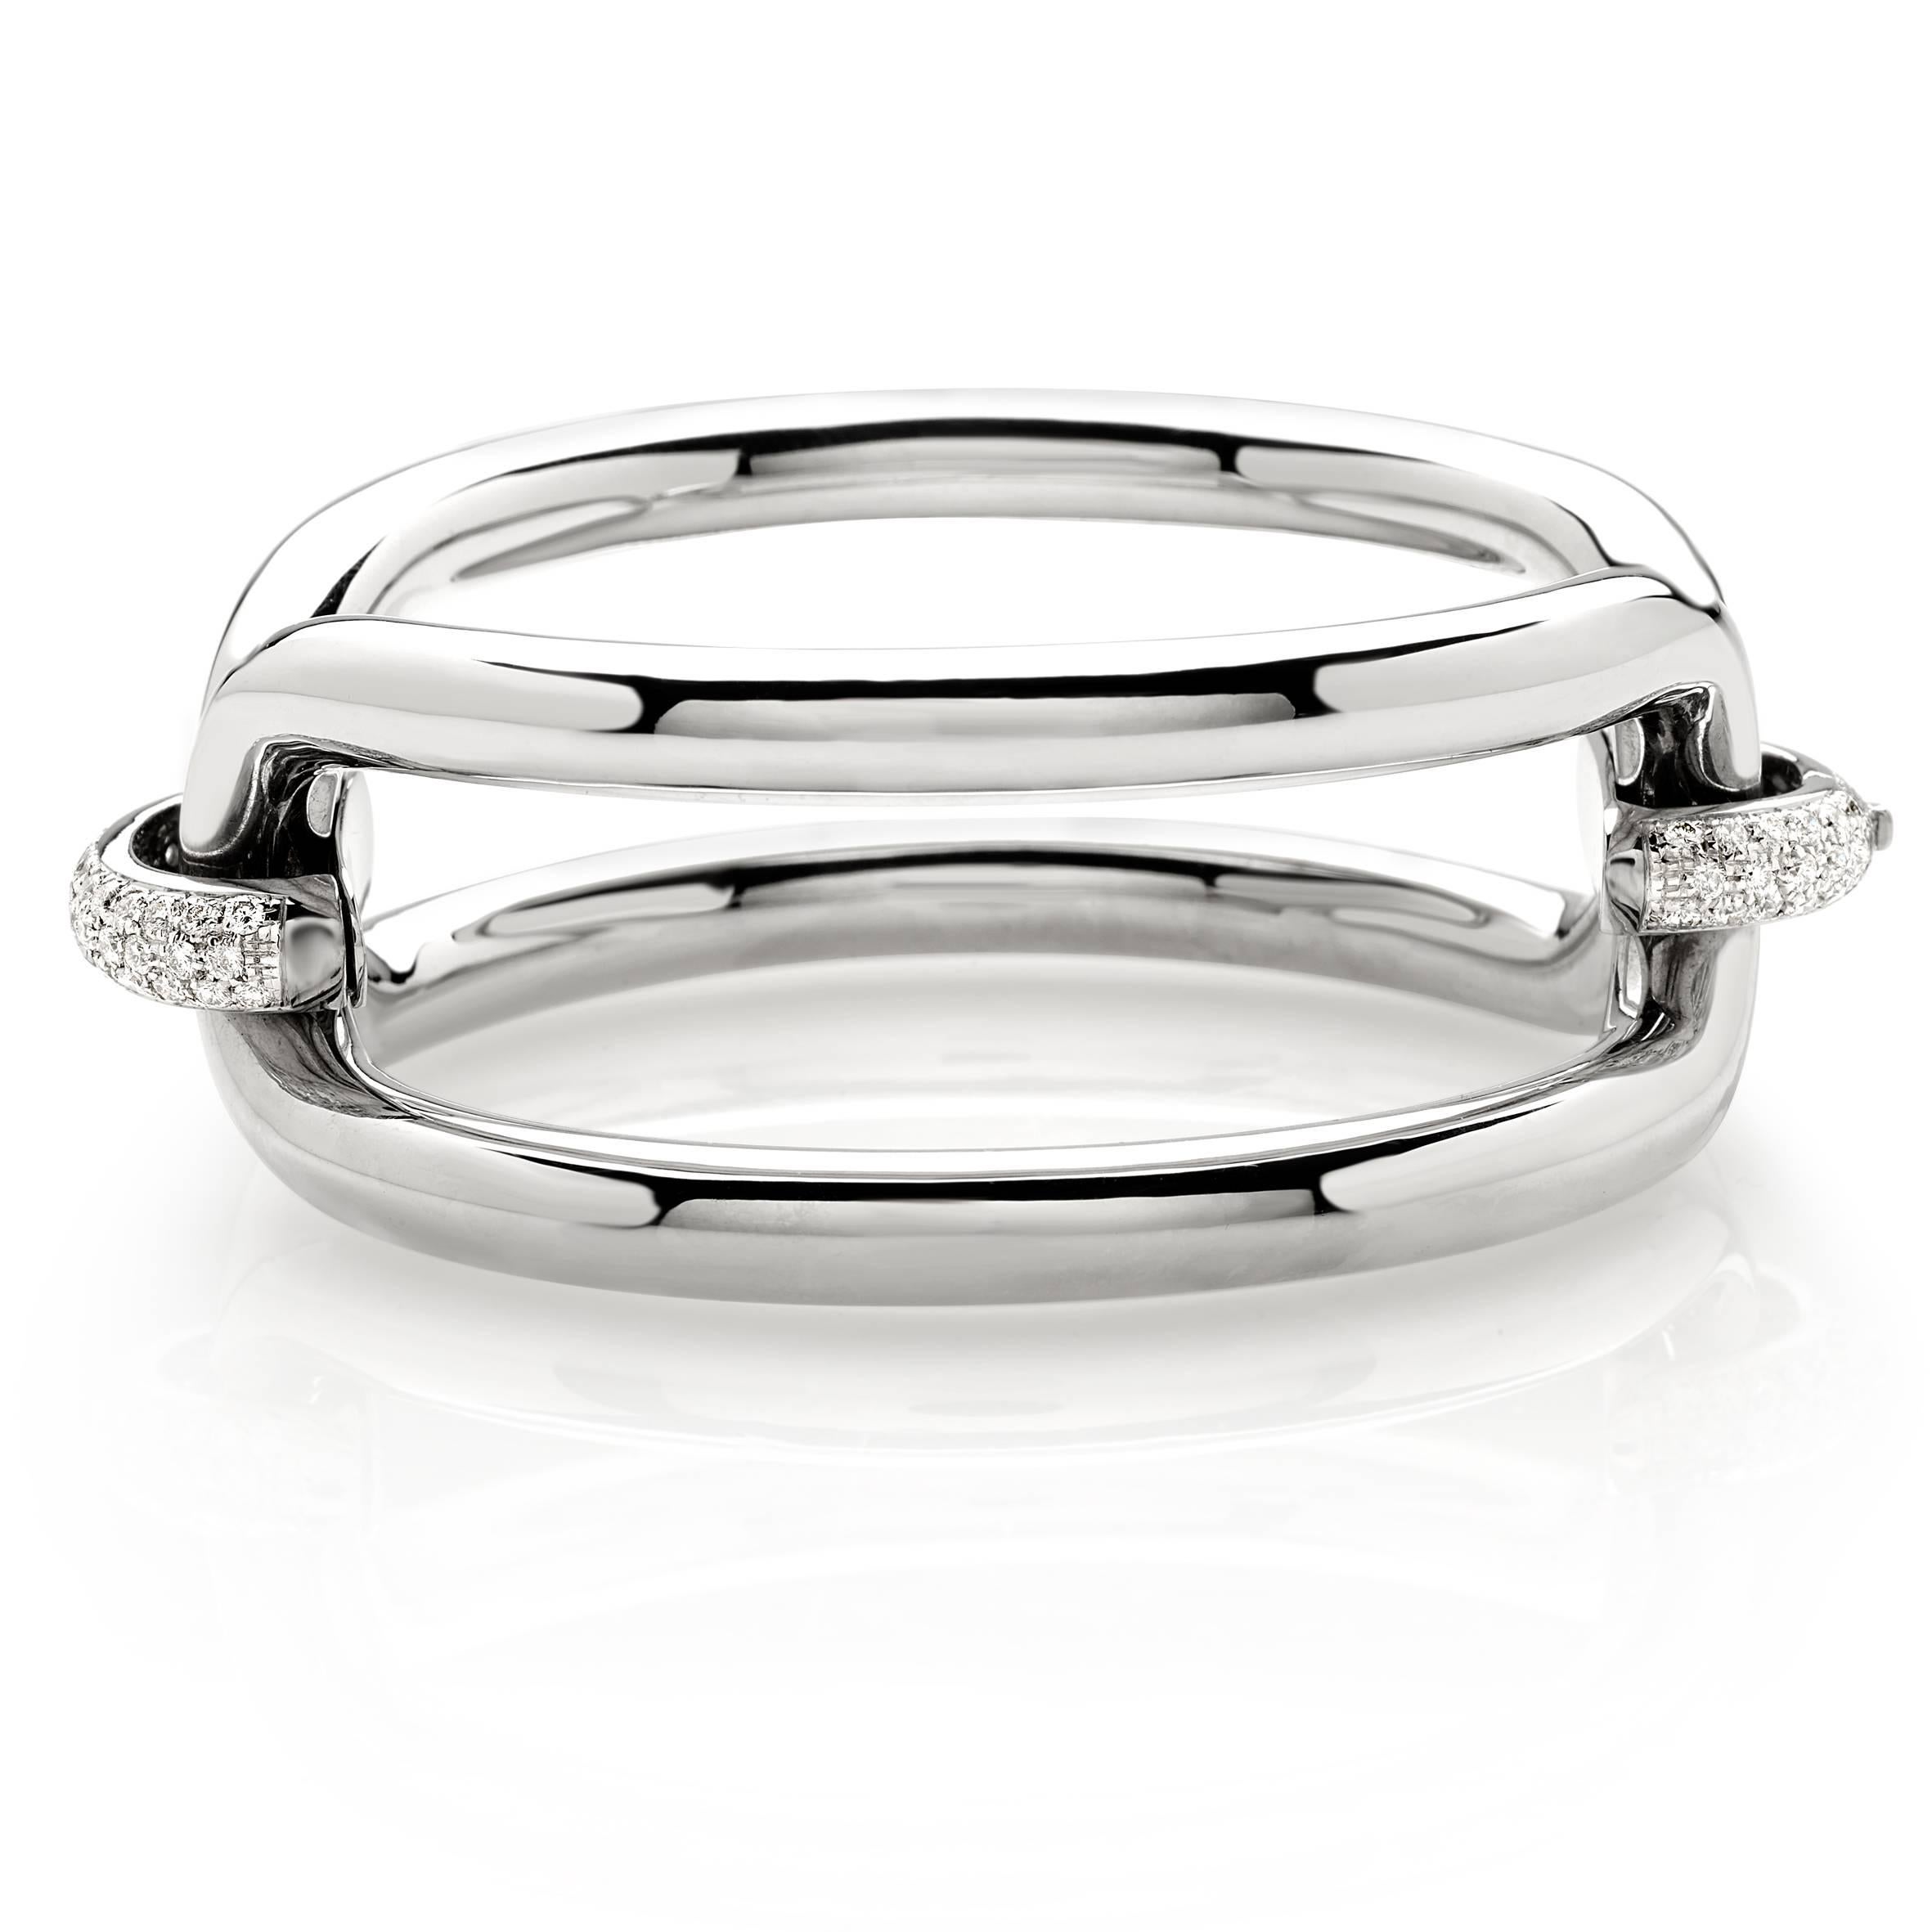 Roberta collection bangle in 18 kt  white gold and white diamonds 
The newest and more popular collection of this year

the total weight of the gold is  gr 59.7
the total weight of the white diamonds is ct 1.85 - color GH clarity VVS1

STAMP: 10 MI